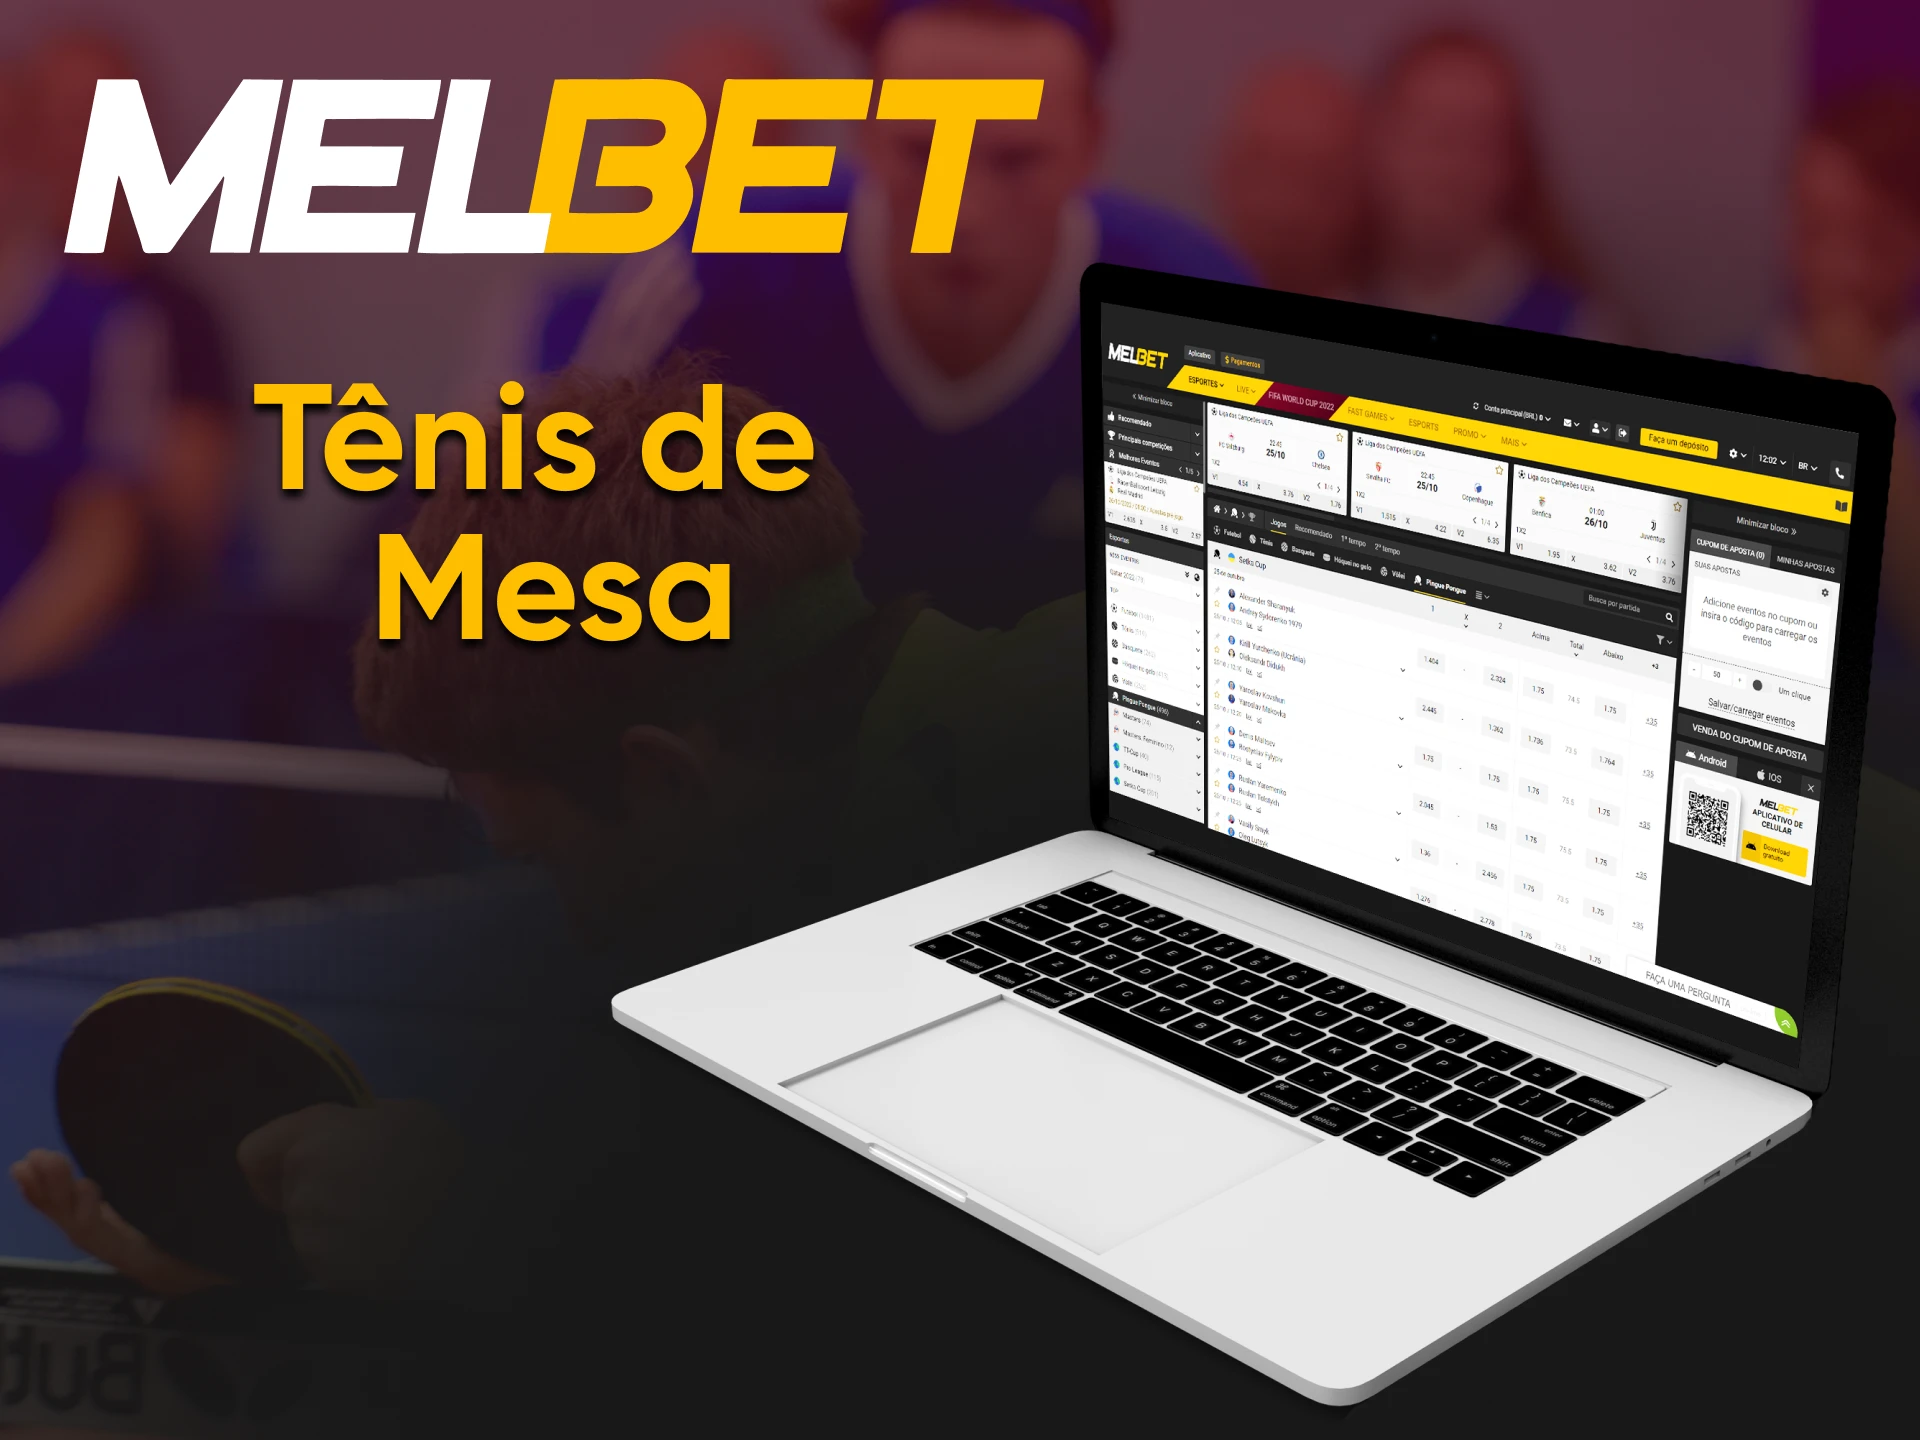 For table tennis bets on Melbet, the amount is in the desired section.